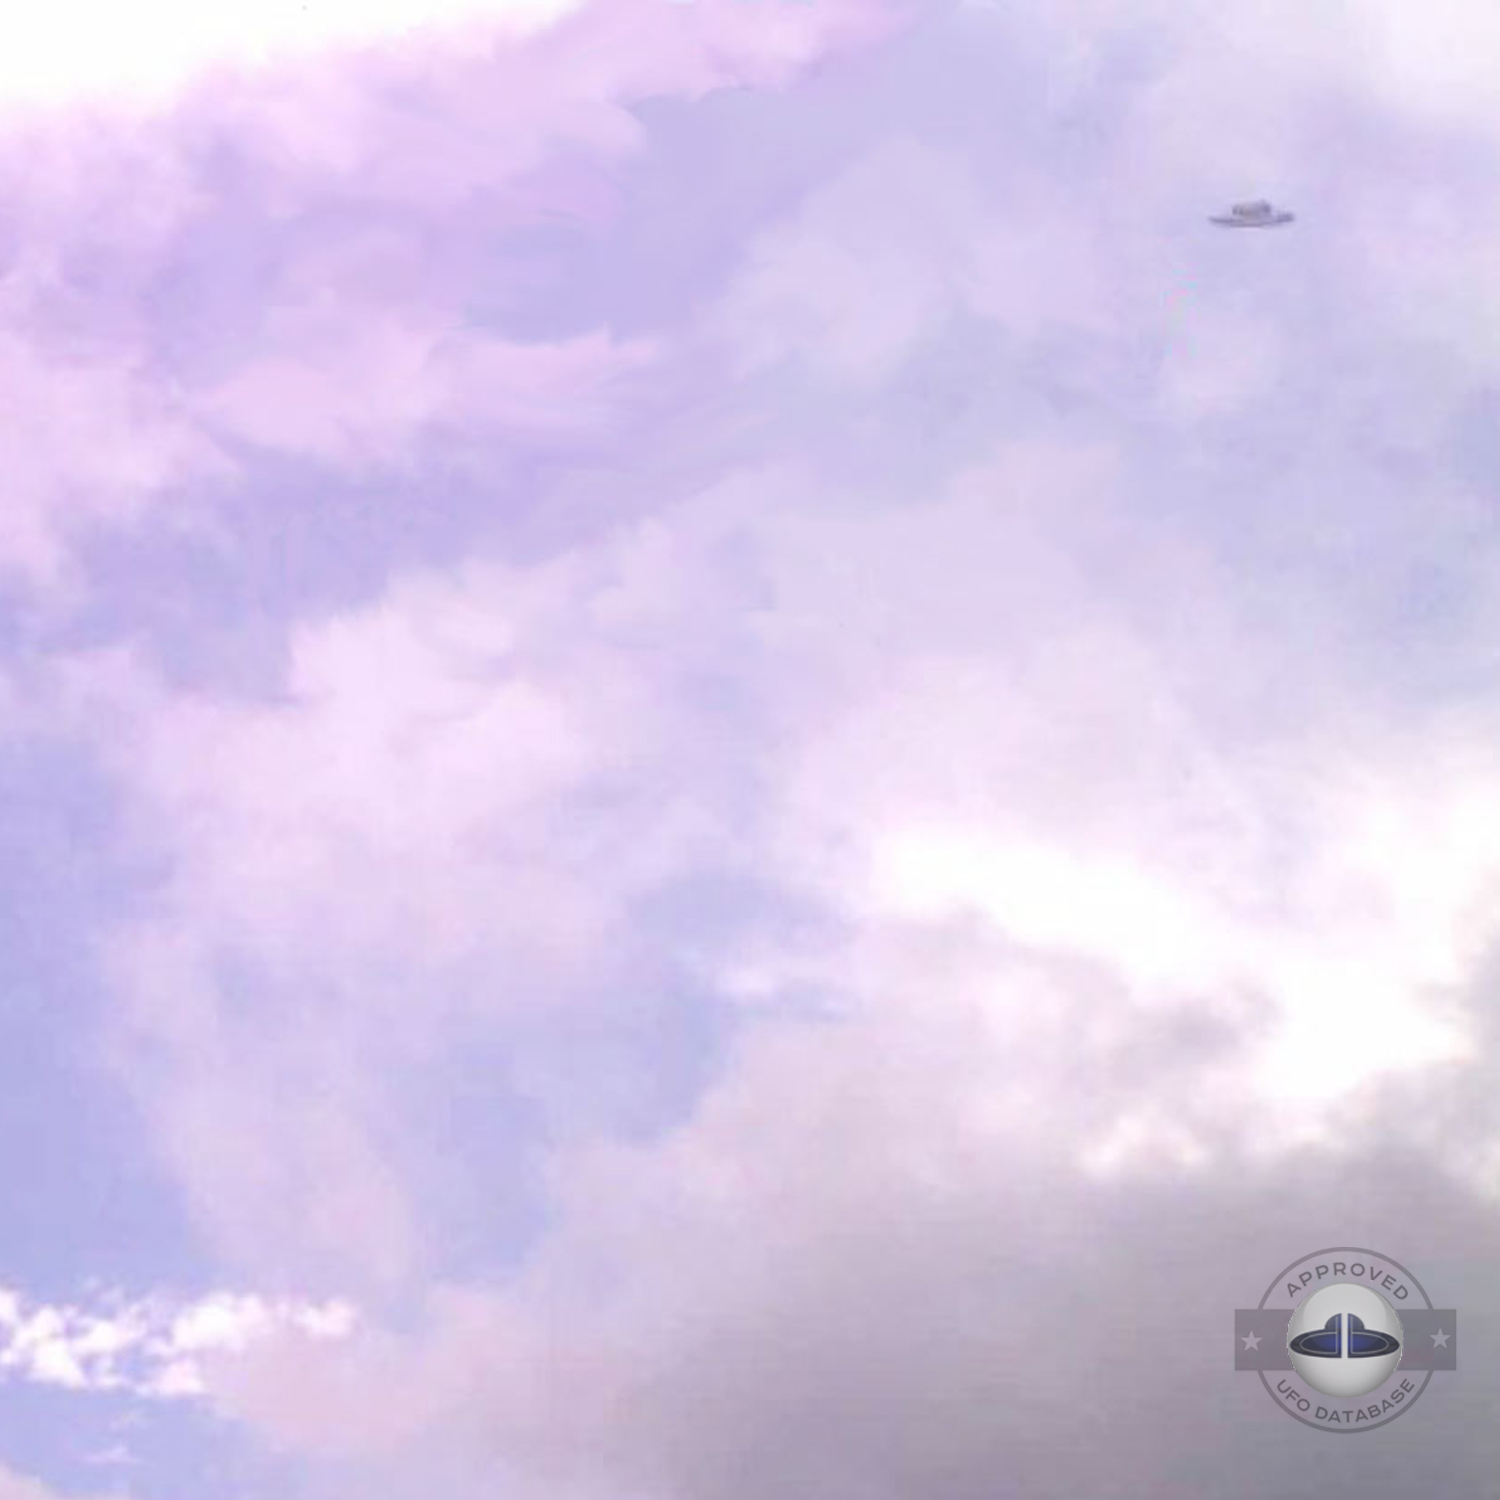 Hat Shaped UFO captured on picture in Shillong | India | August 2009 UFO Picture #224-2